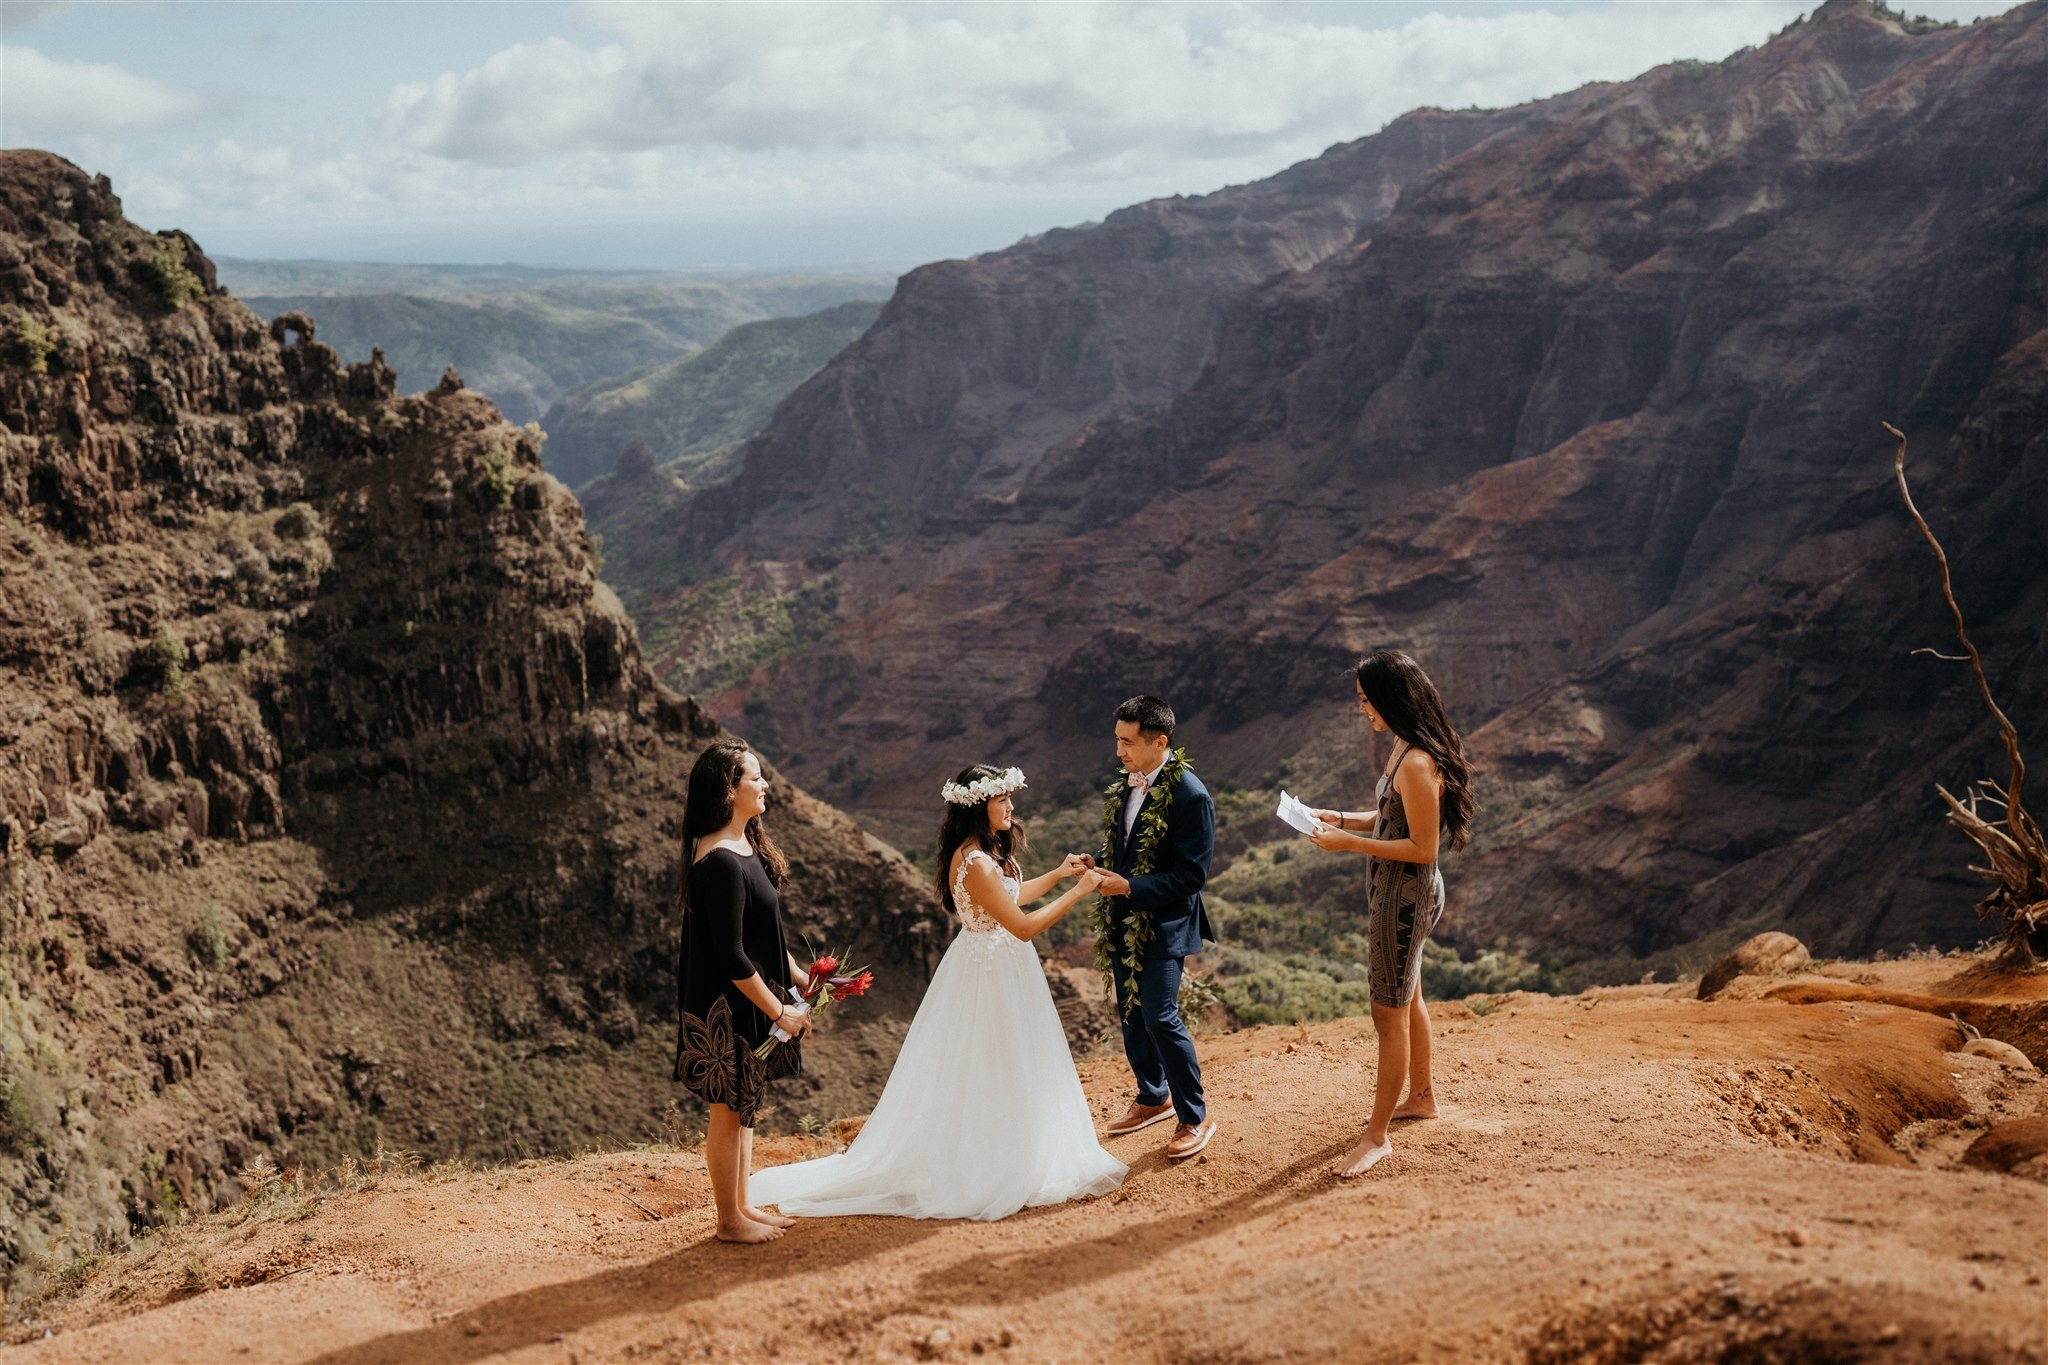 Bride and groom holding hands during elopement ceremony in Kauai